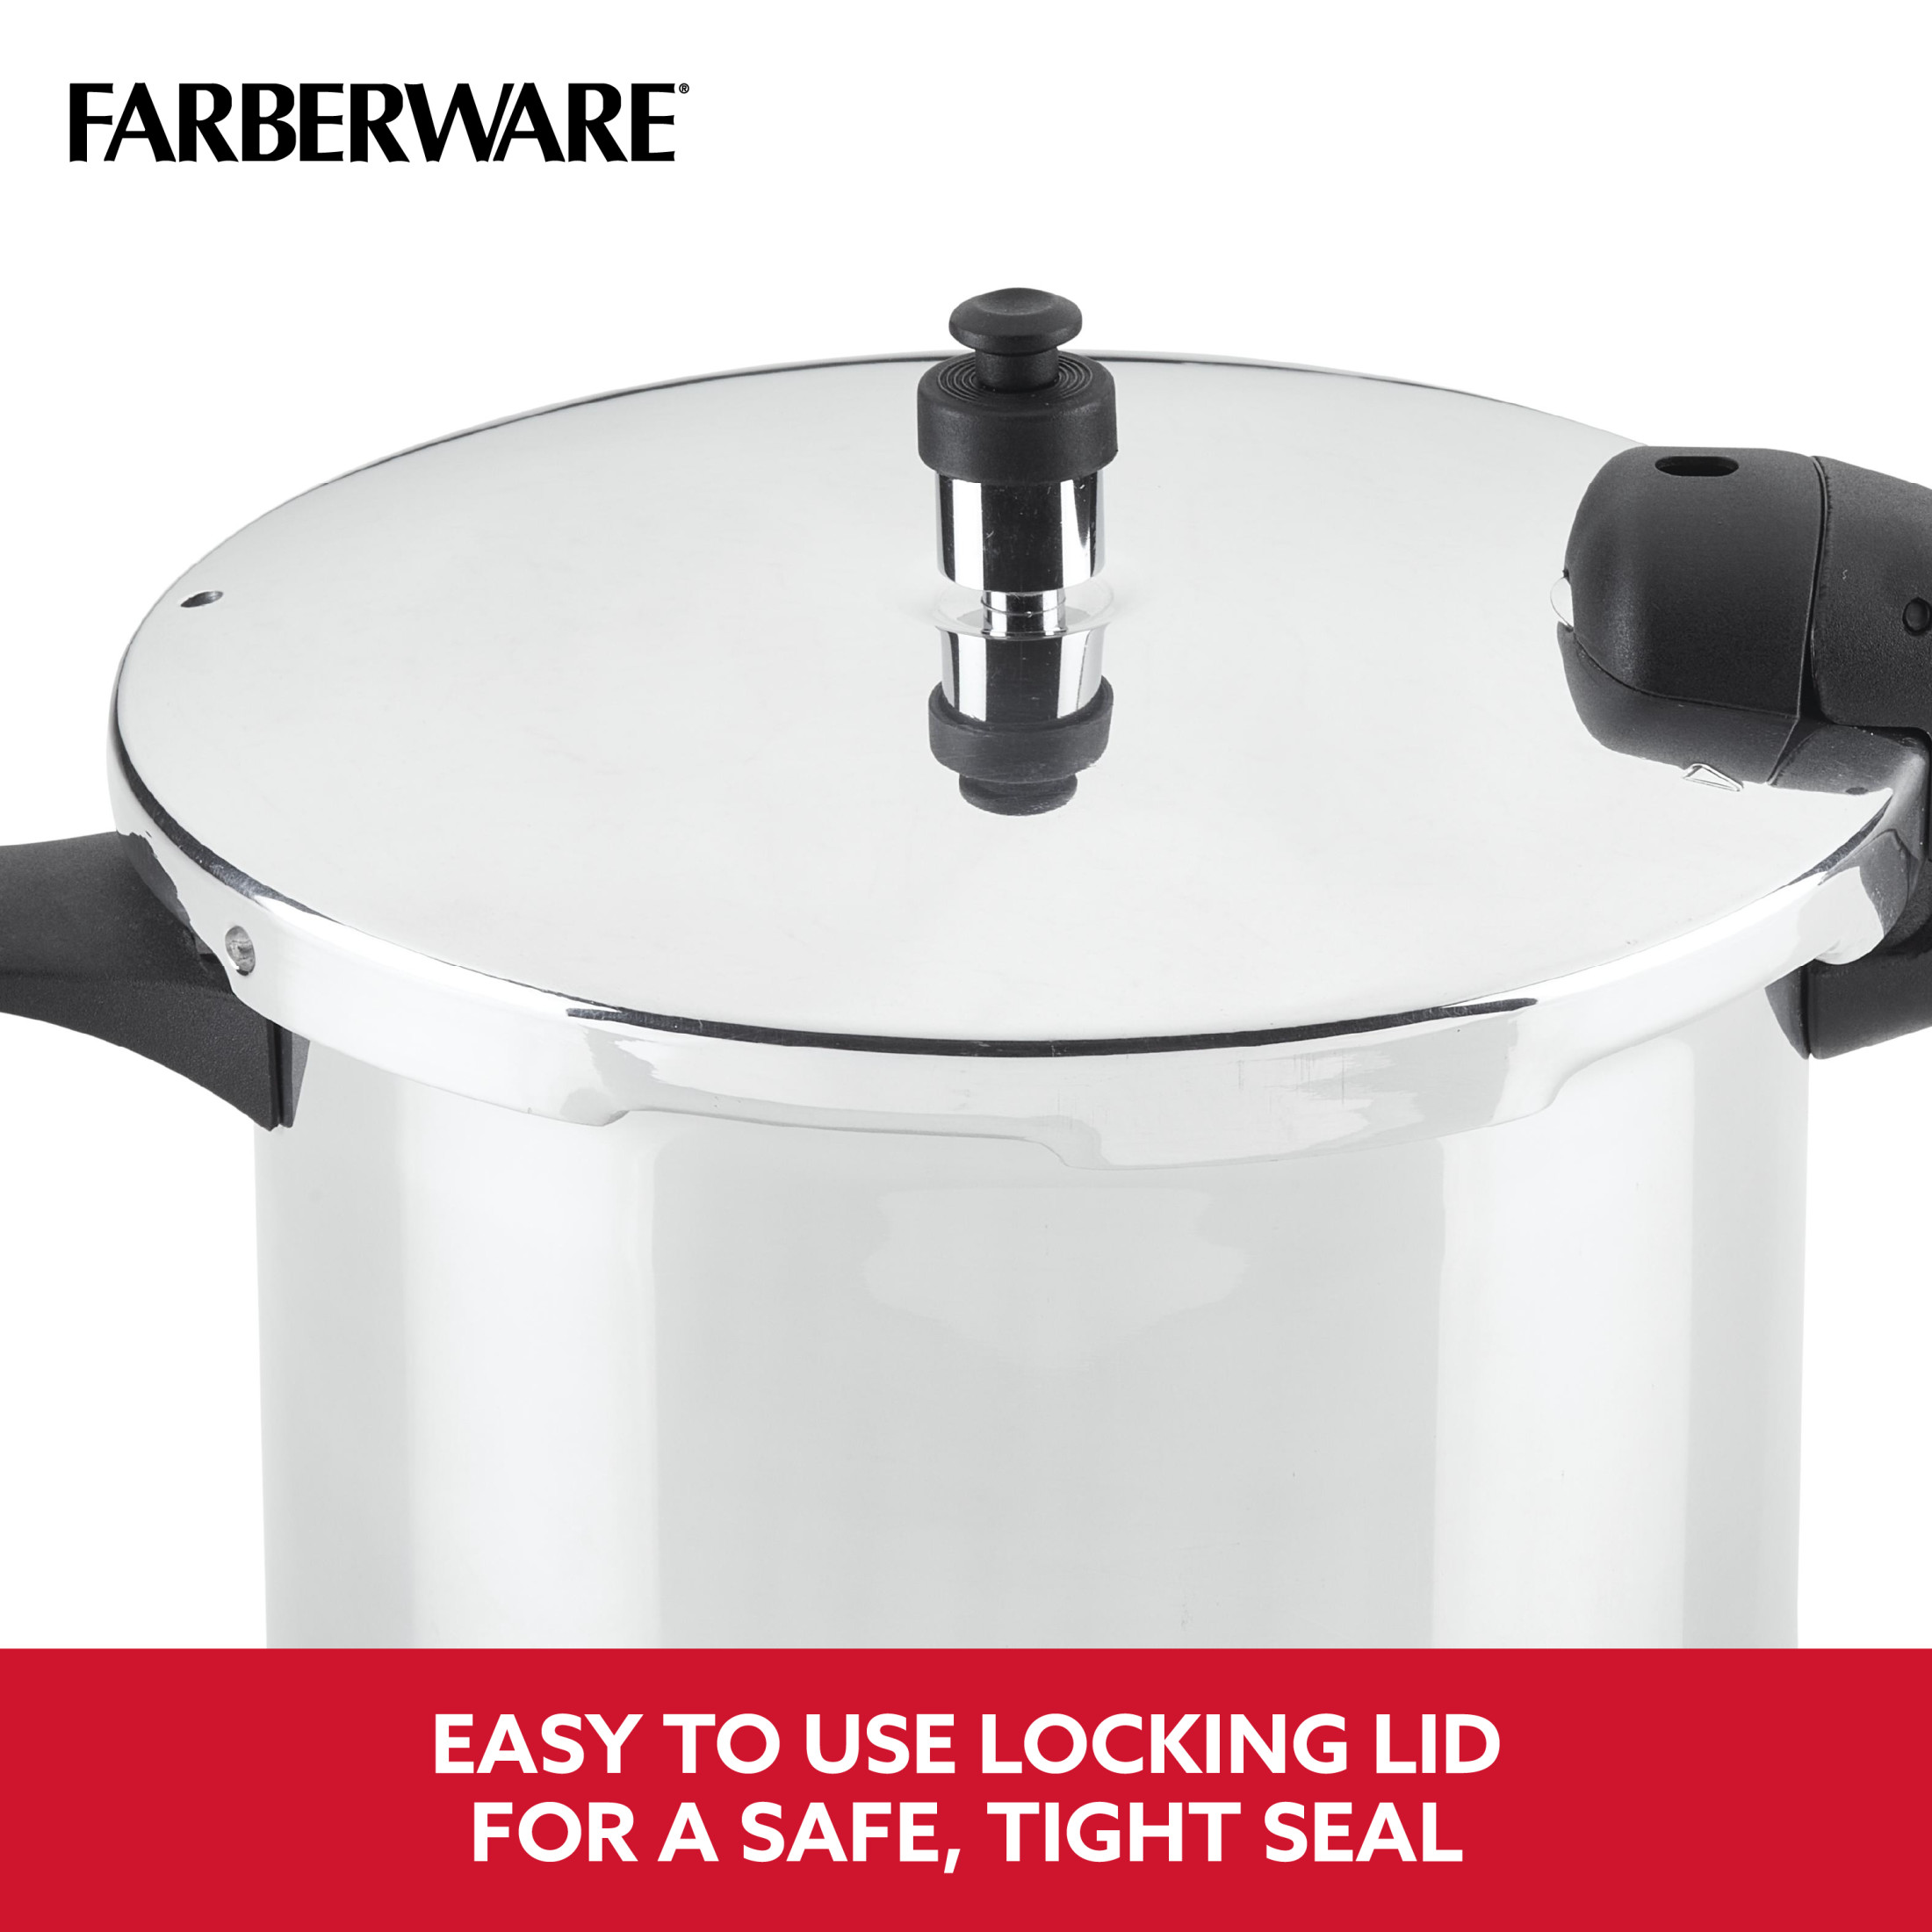 Farberware Stainless Steel Induction Stovetop Pressure Cooker, 8-Quart - image 4 of 12